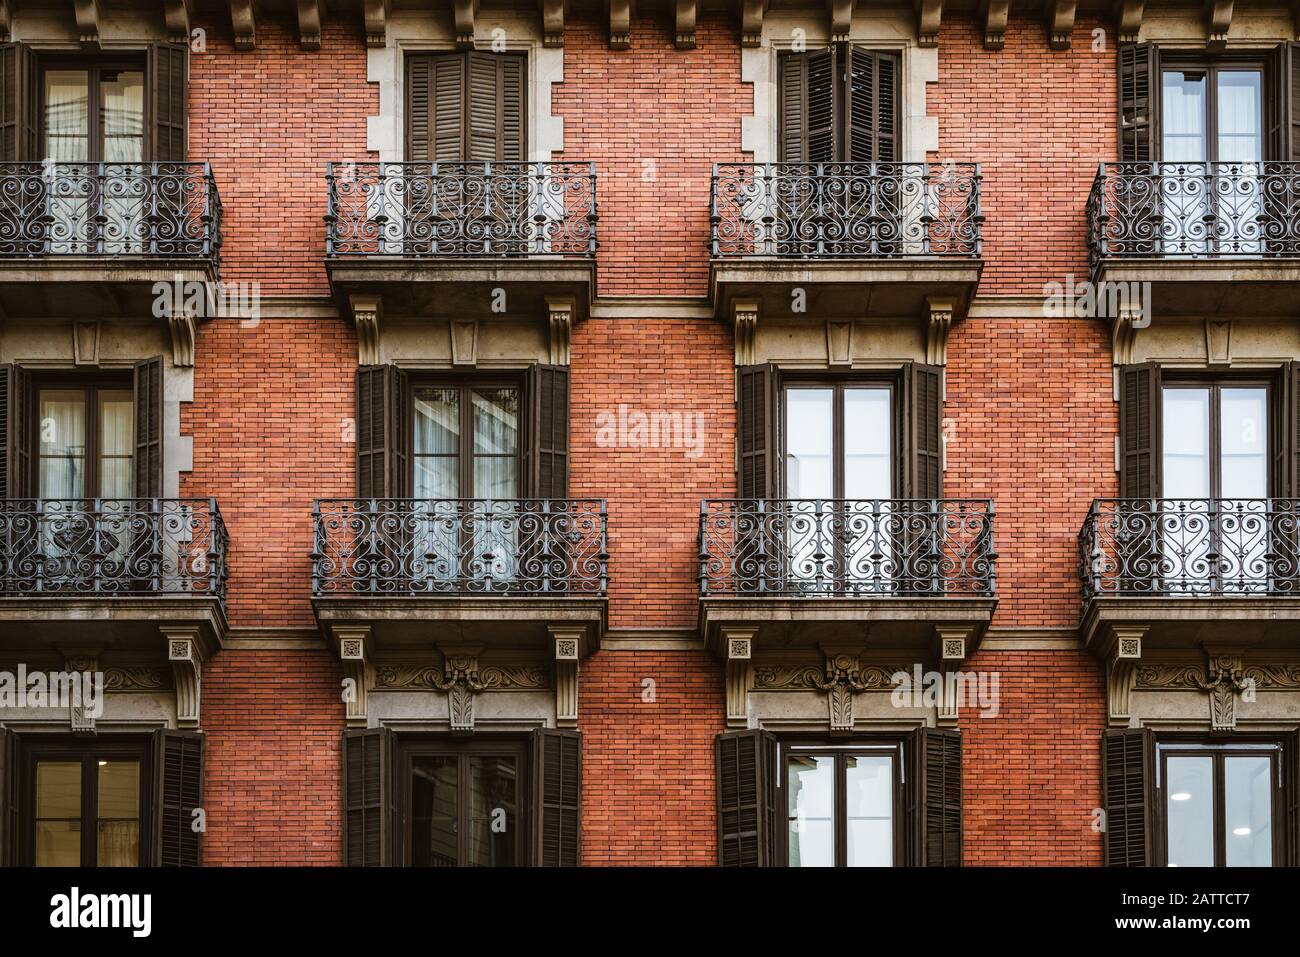 Red brick facade with wrought iron balconies Stock Photo